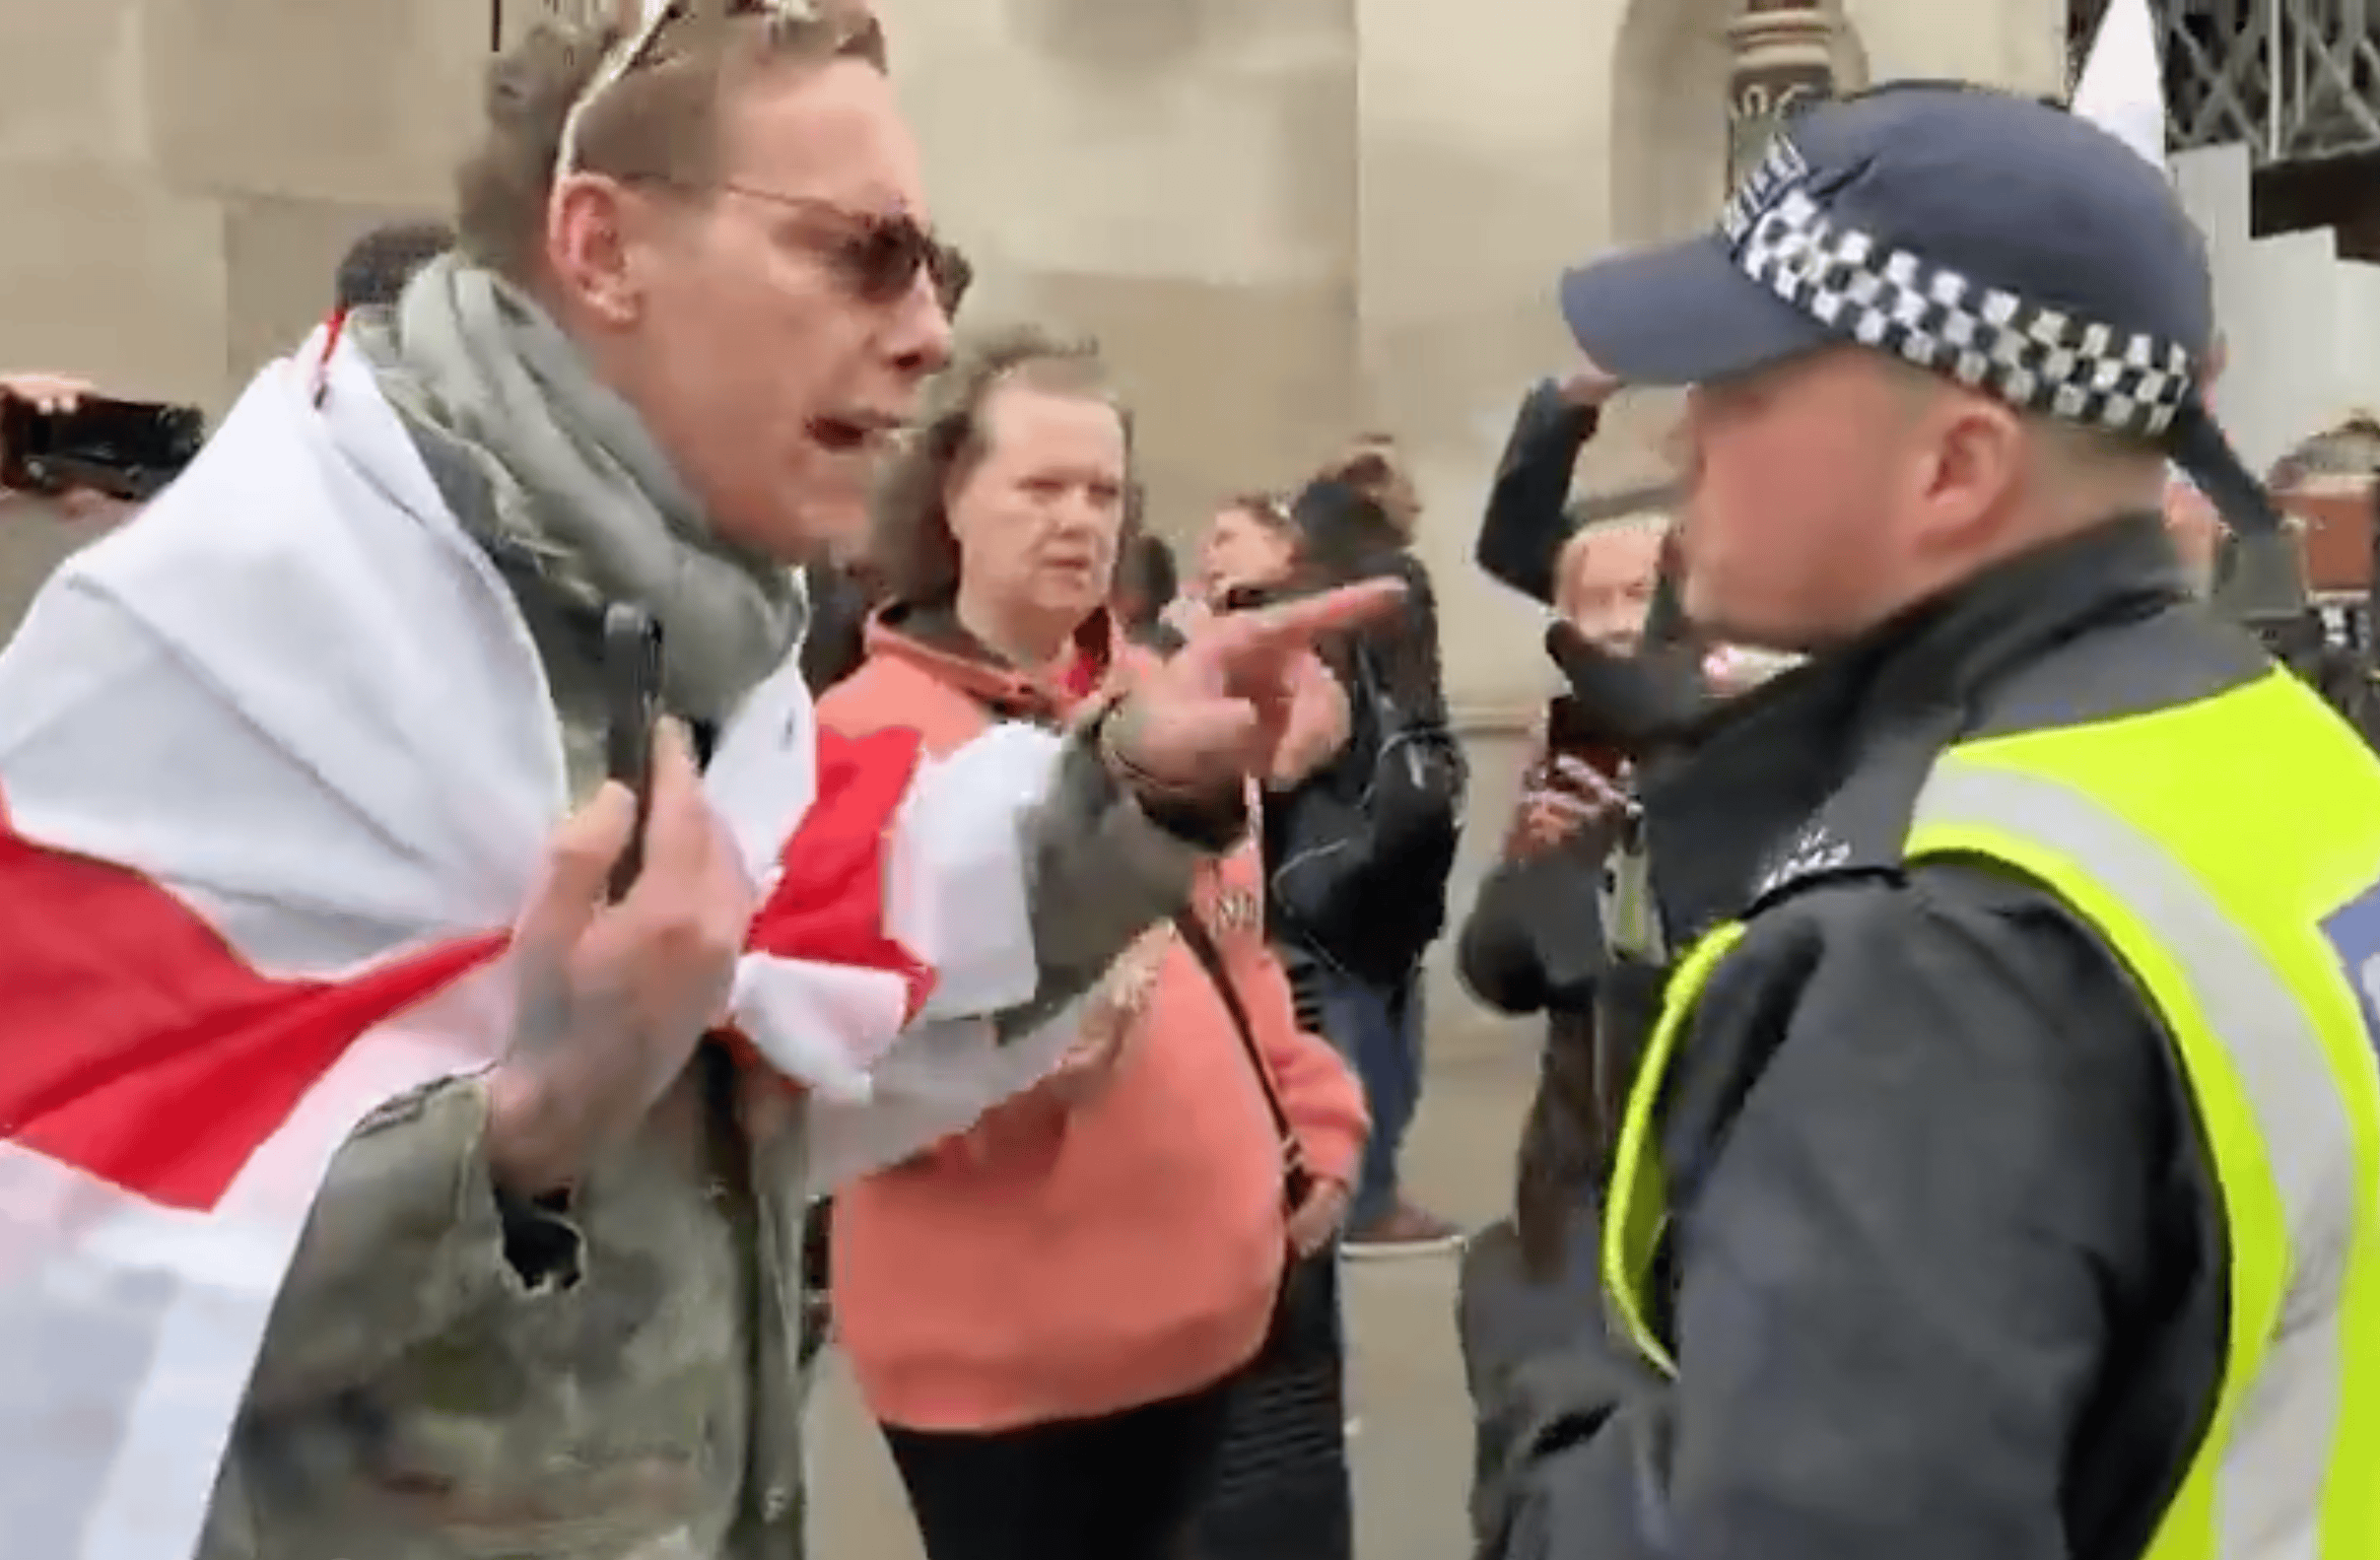 Laurence Fox attended St George’s march and just spent the day shouting at police officers